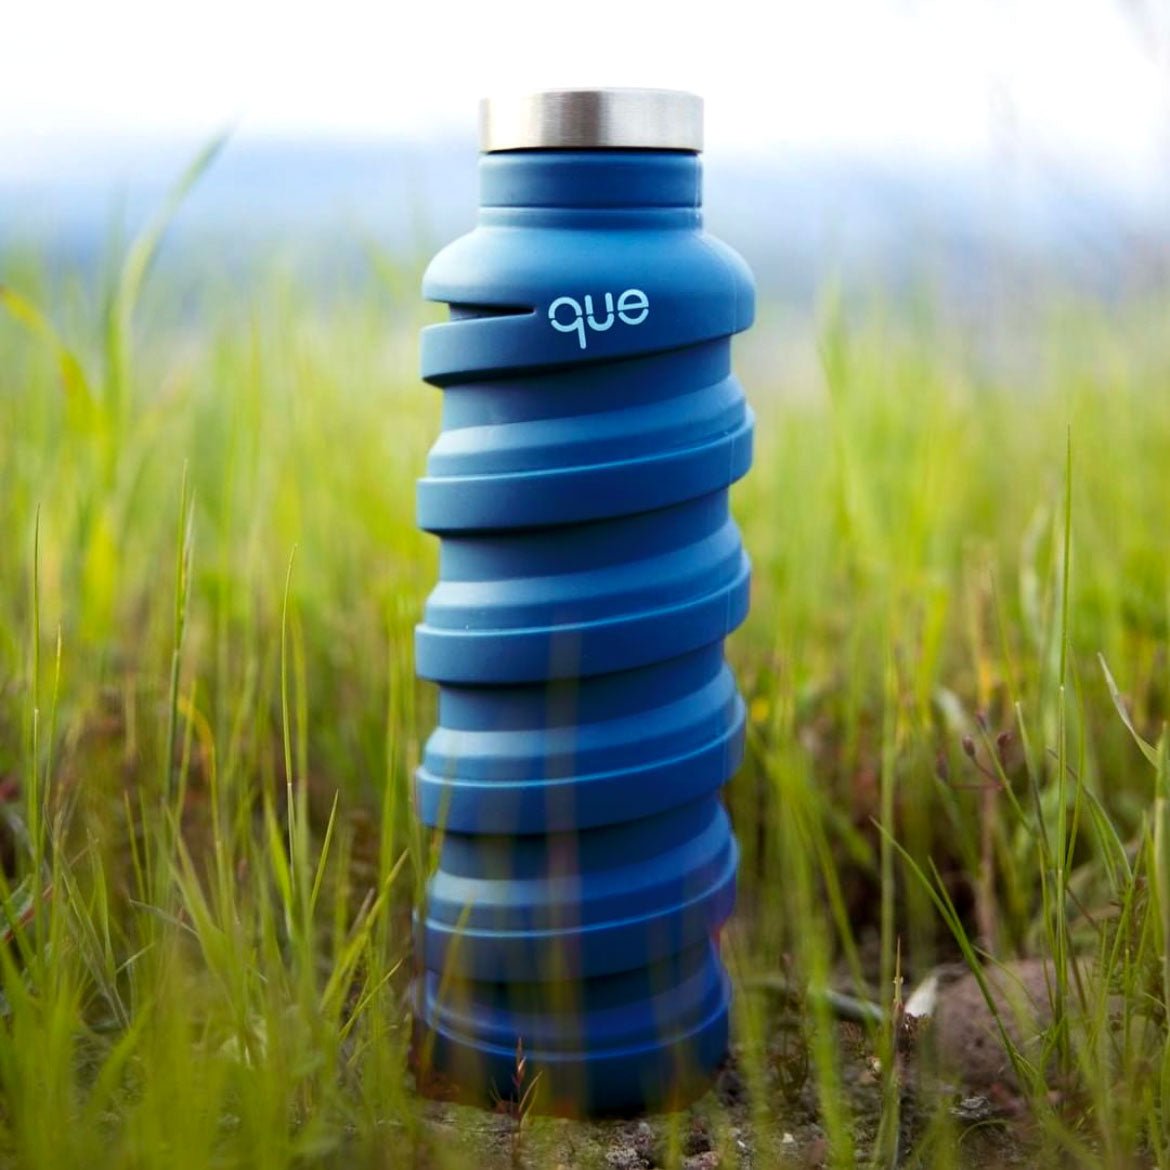 Que Bottle eco friendly & sustainable water bottle